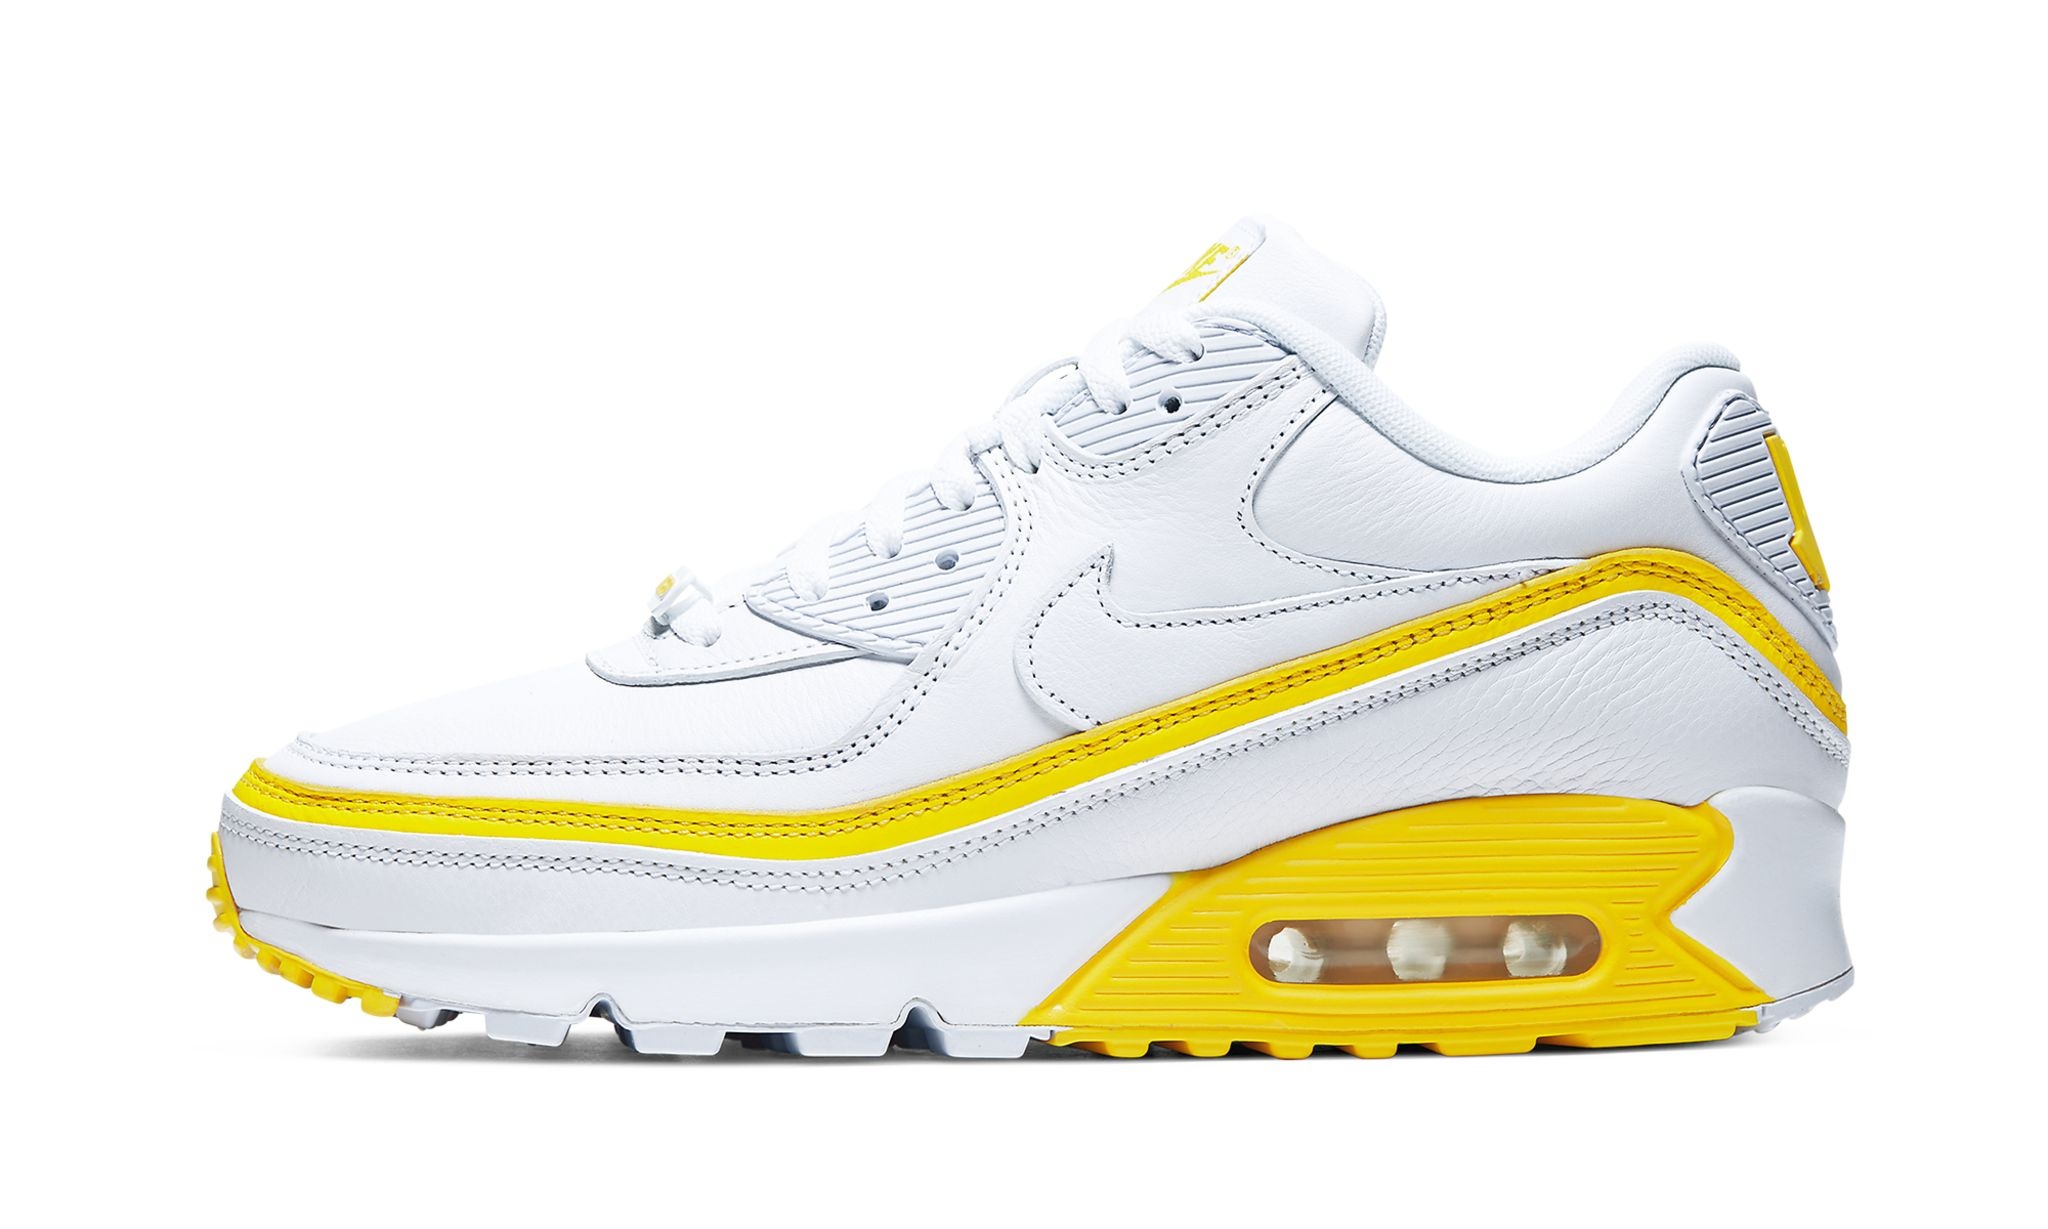 Air Max 90 / UNDFTD "Undefeated - White/Optic Yellow" - 1